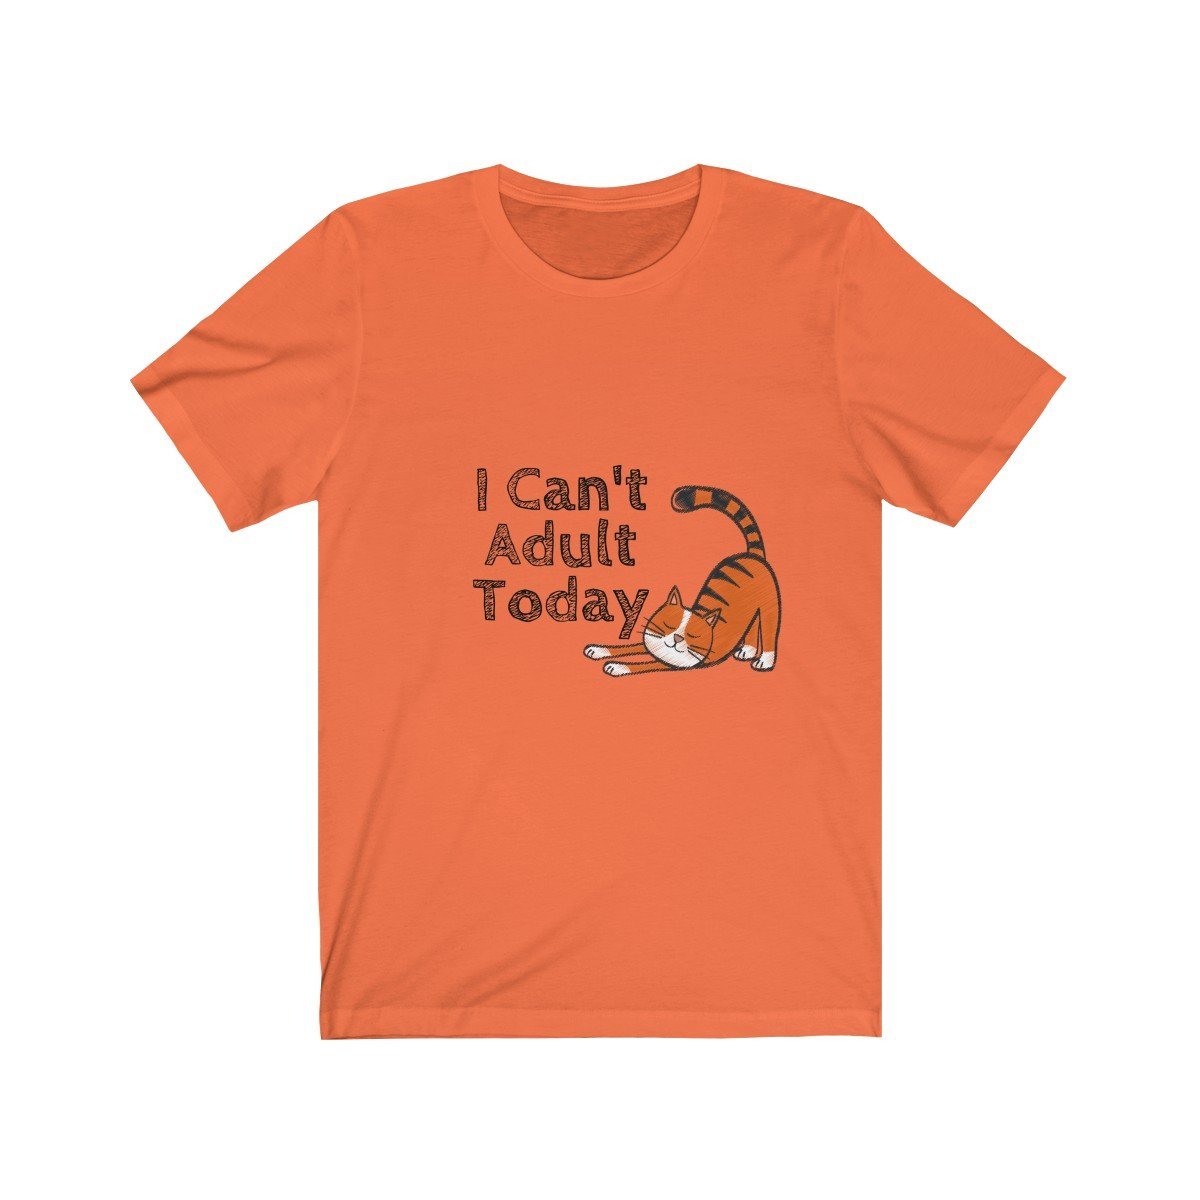 Funny Cat Shirt Featuring the Phrase I Can't Adult Today and a Persian Cat Printed On Soft Cotton Fabric